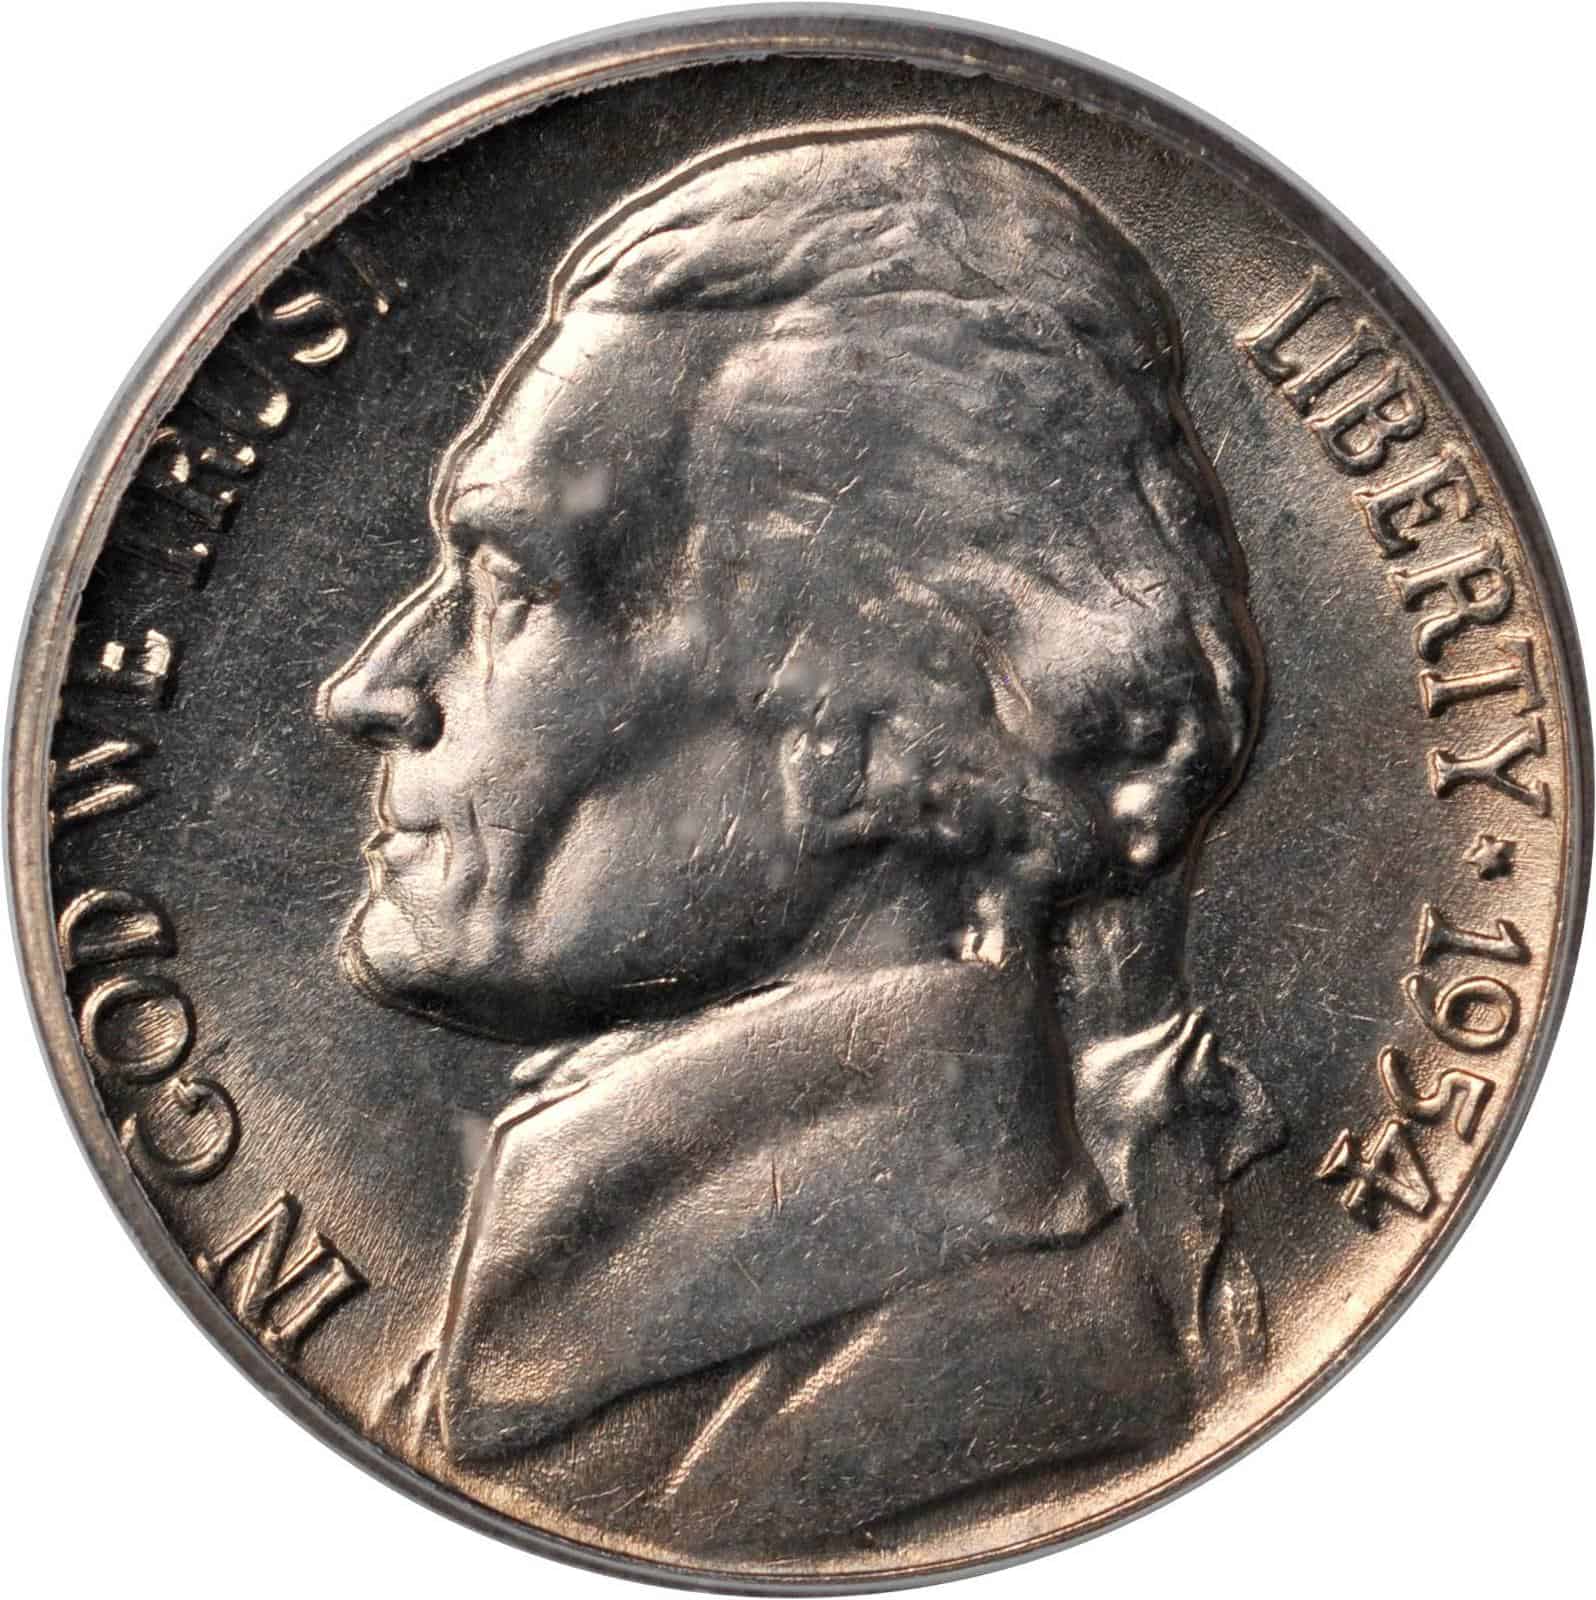 The obverse of the 1954 Jefferson nickel